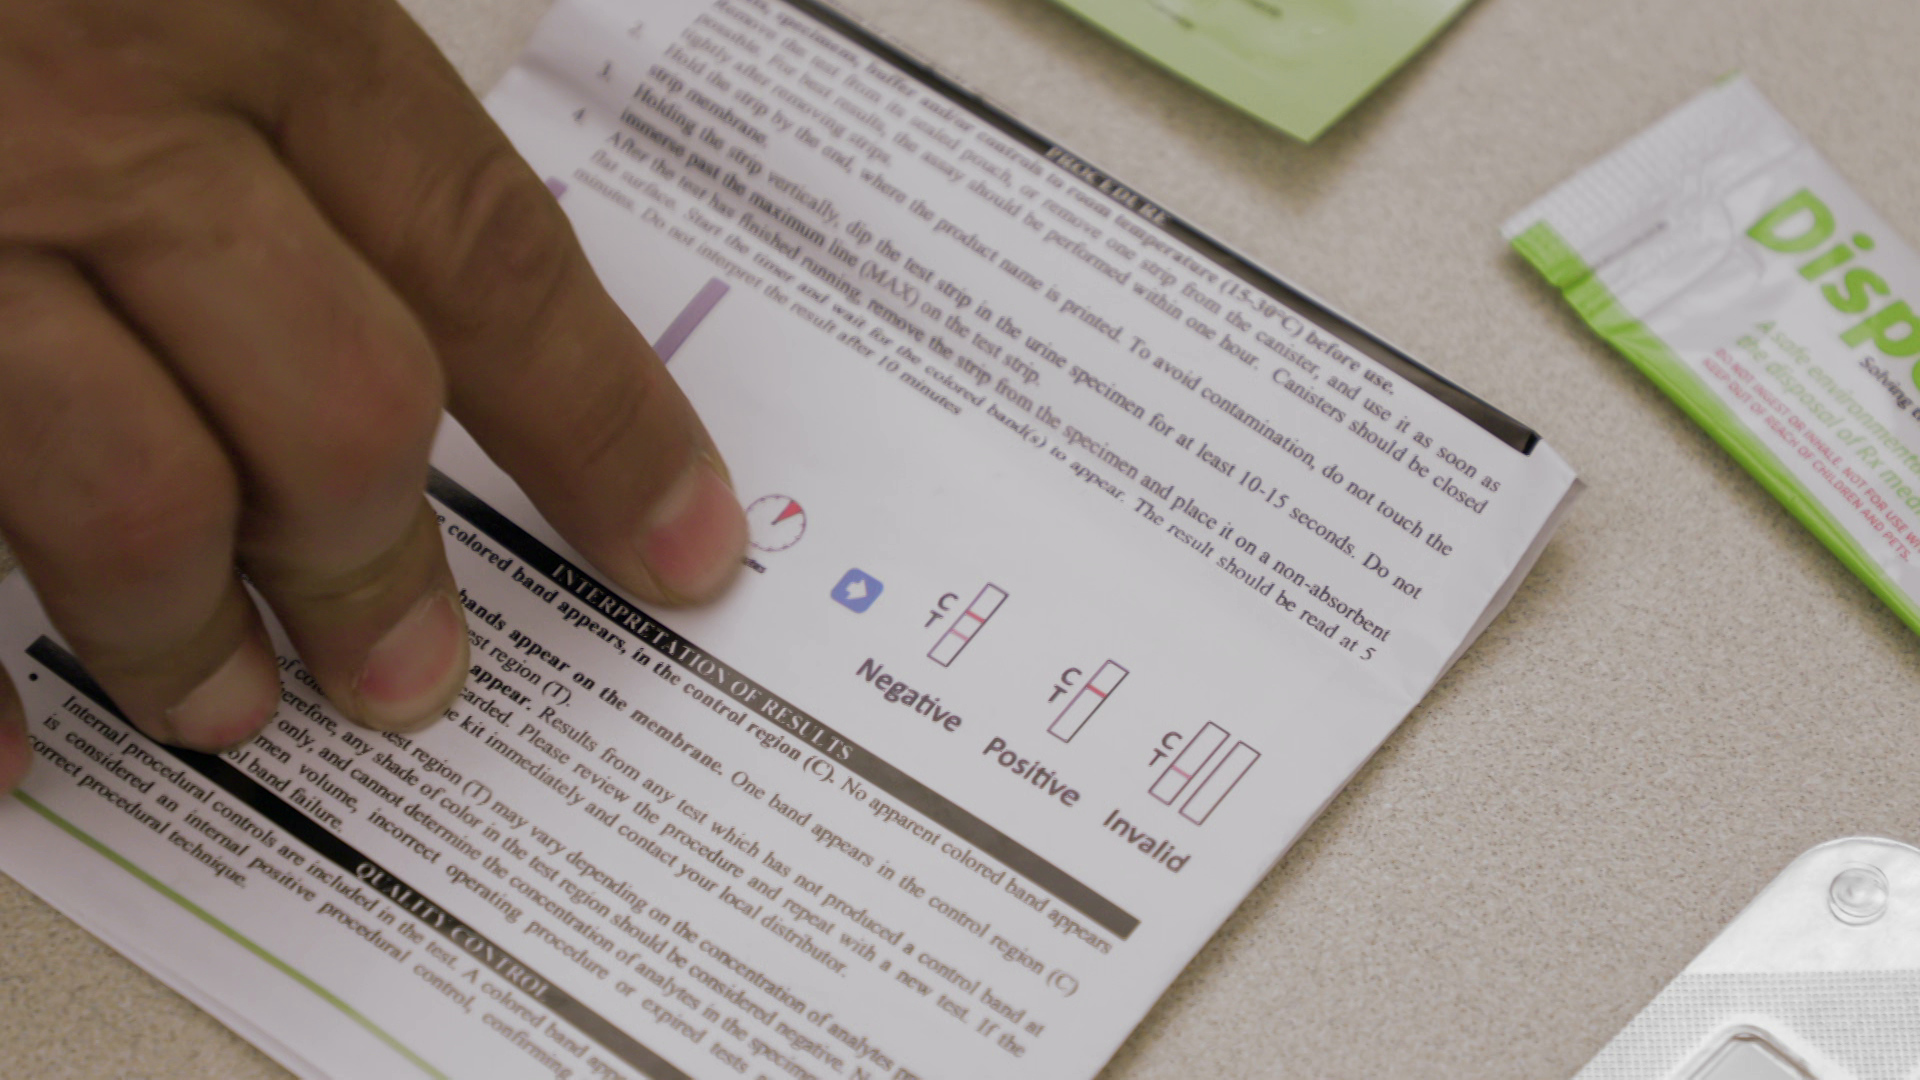 An index finger points toward instructions for a fentanyl testing strip.